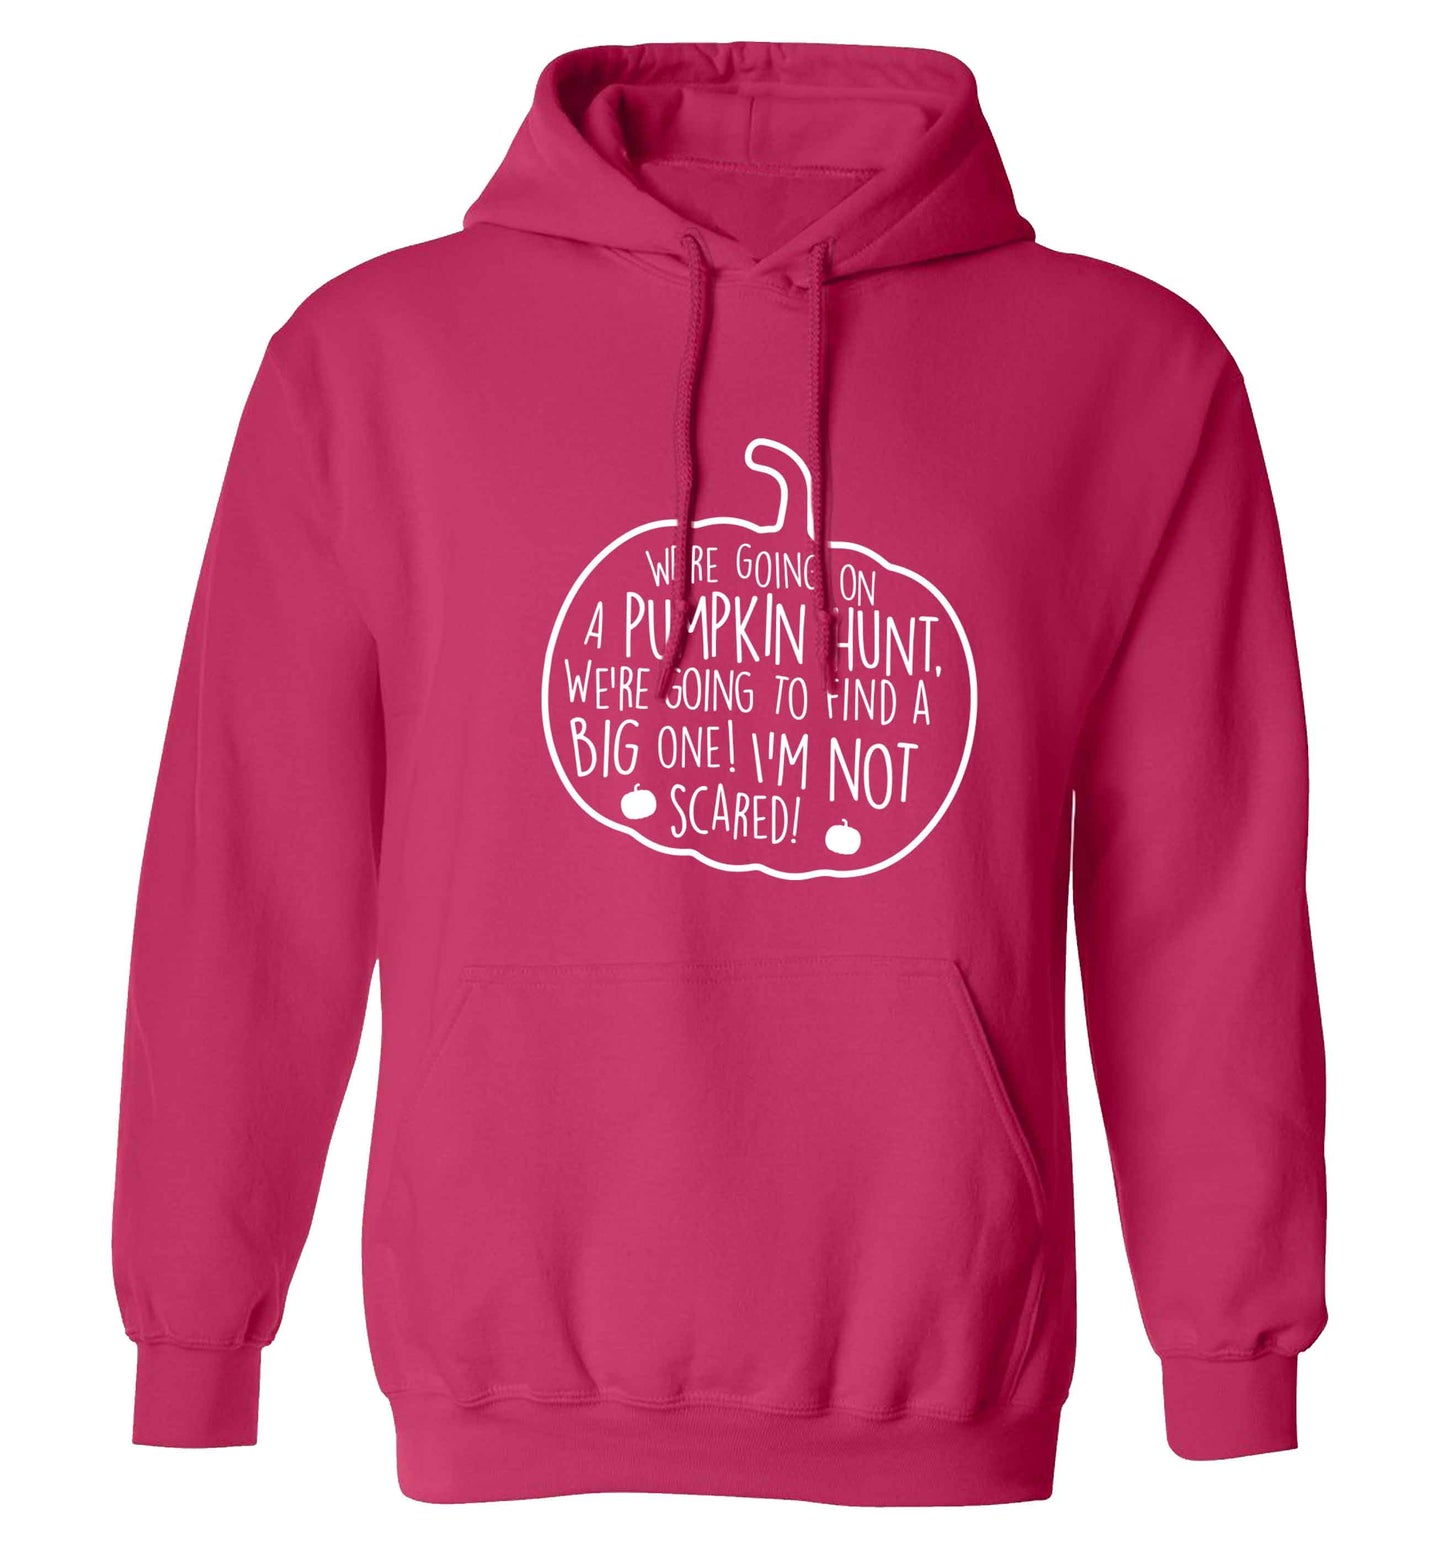 We're going on a pumpkin hunt adults unisex pink hoodie 2XL